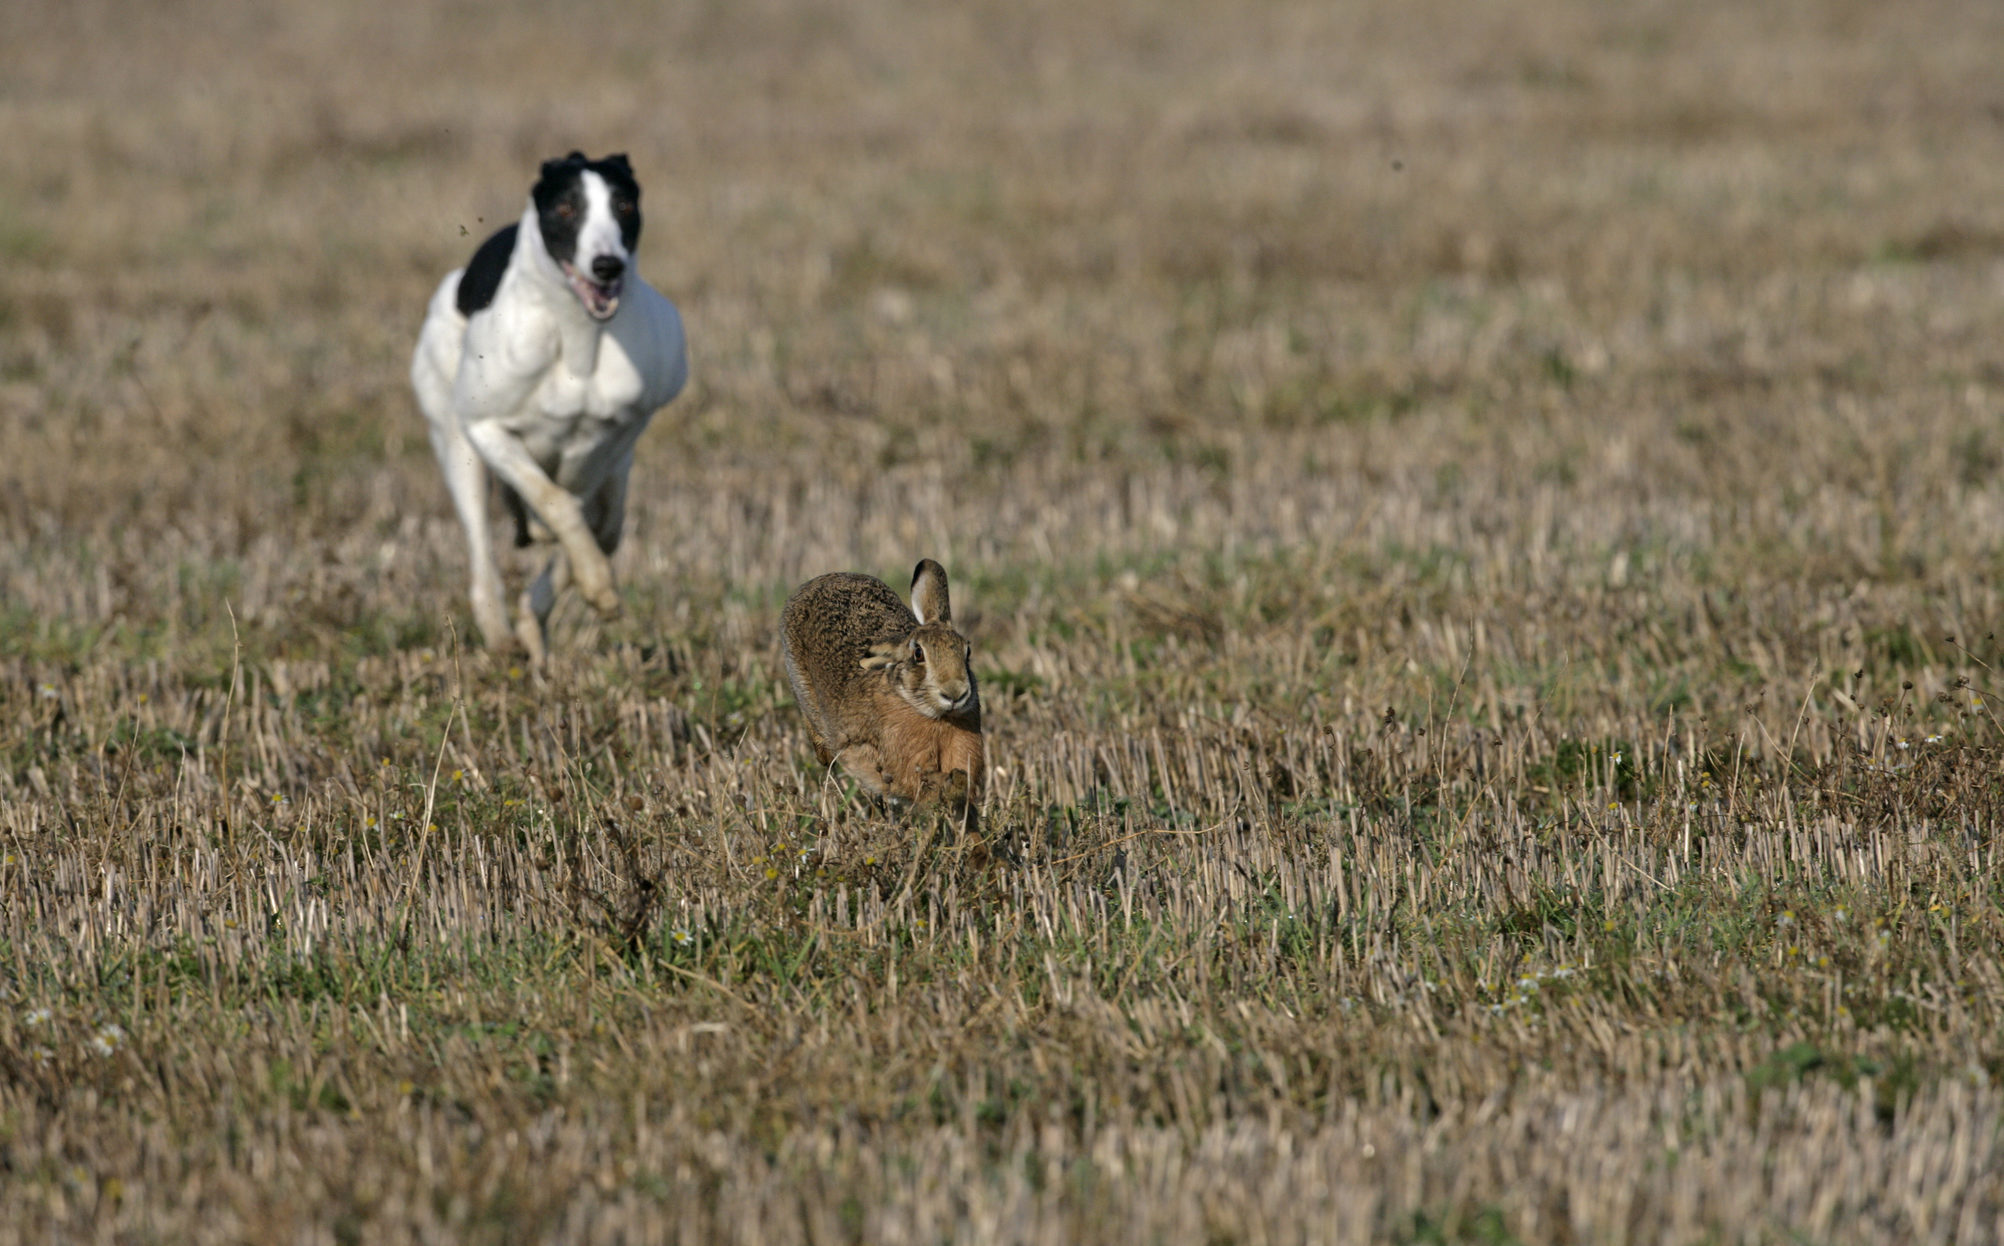 Incidents of hare coursing are becoming more common in Angus.